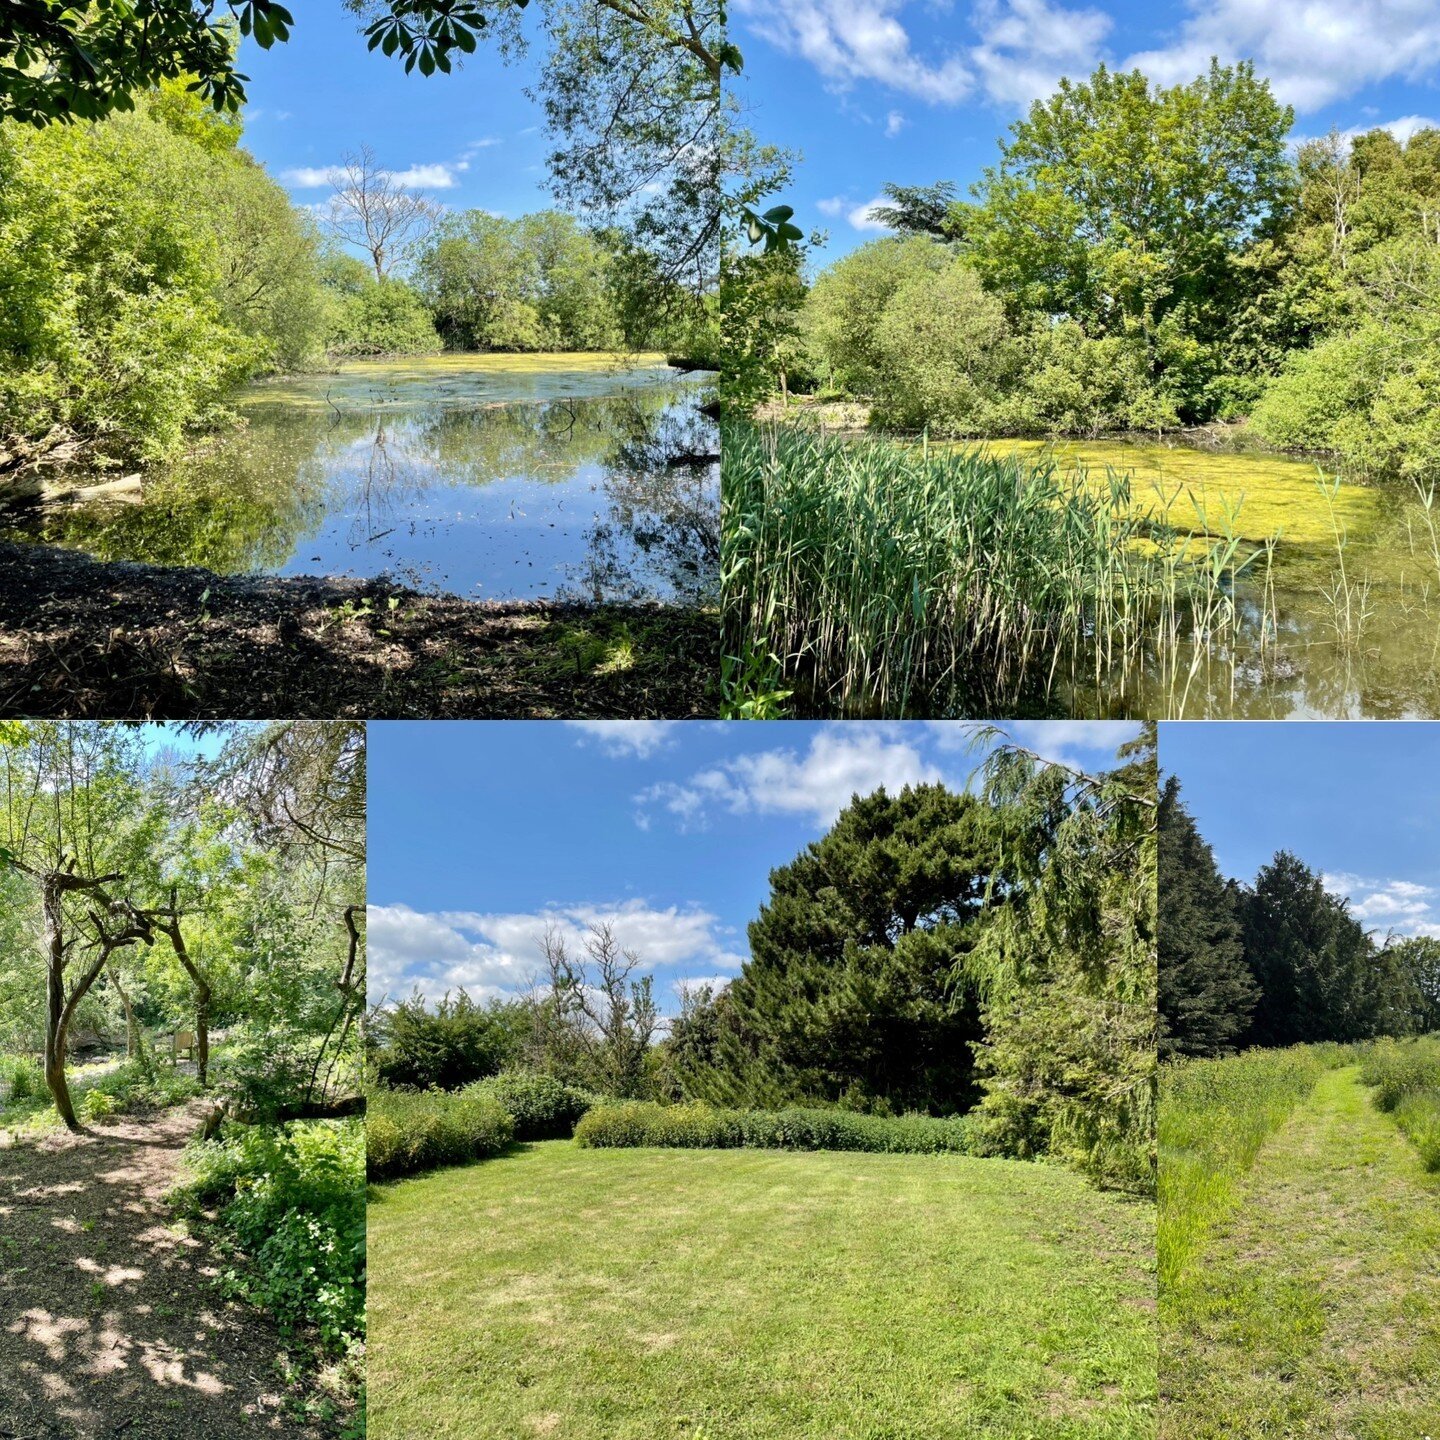 Enjoy a walk around the private nature reserve we have at Bawdsey Hall during your stay with us.

Wander in the nature reserve and take a minute to pause and take in the #wildlife &ndash; including a variety of #birds, #mammals, #insects and rare #tr